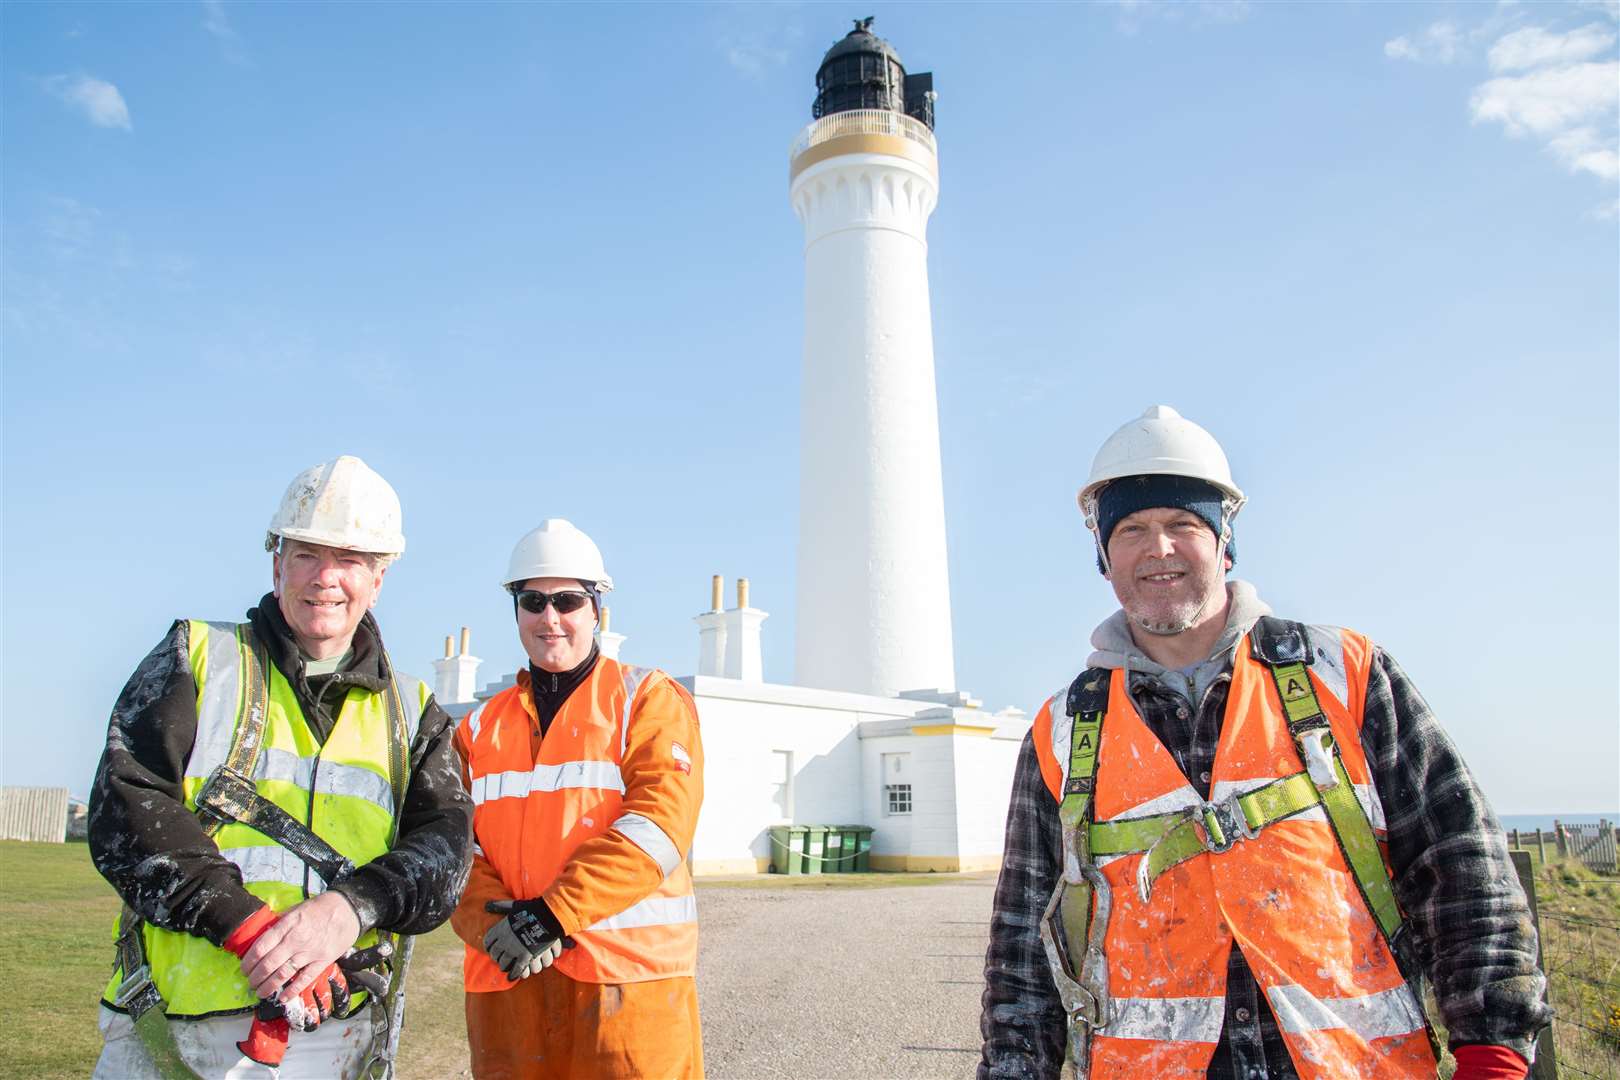 From left; Stevie Martin, Ross Simpson and Darren Marshall who painted the lighthouse tower. Picture: Daniel Forsyth